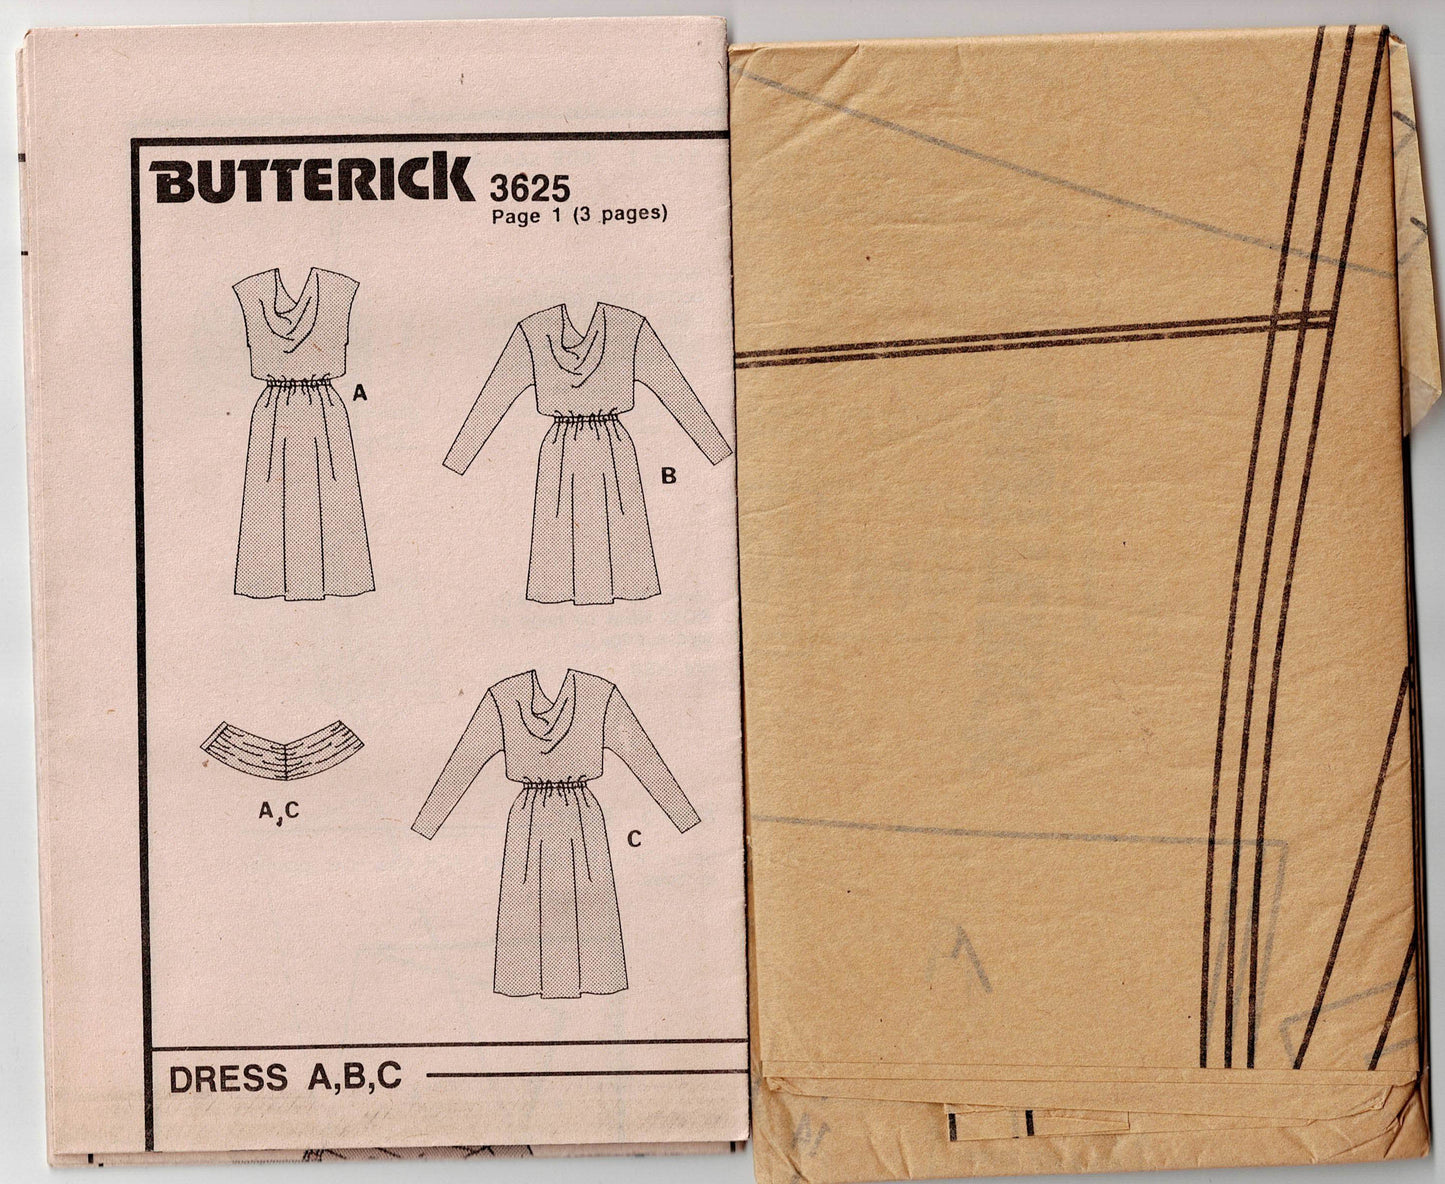 Butterick 3625 Womens Blouson Dress with Draped Neckline & Ruched Waist 1980s Vintage Sewing Pattern Size 14 - 18 UNCUT Factory Folded